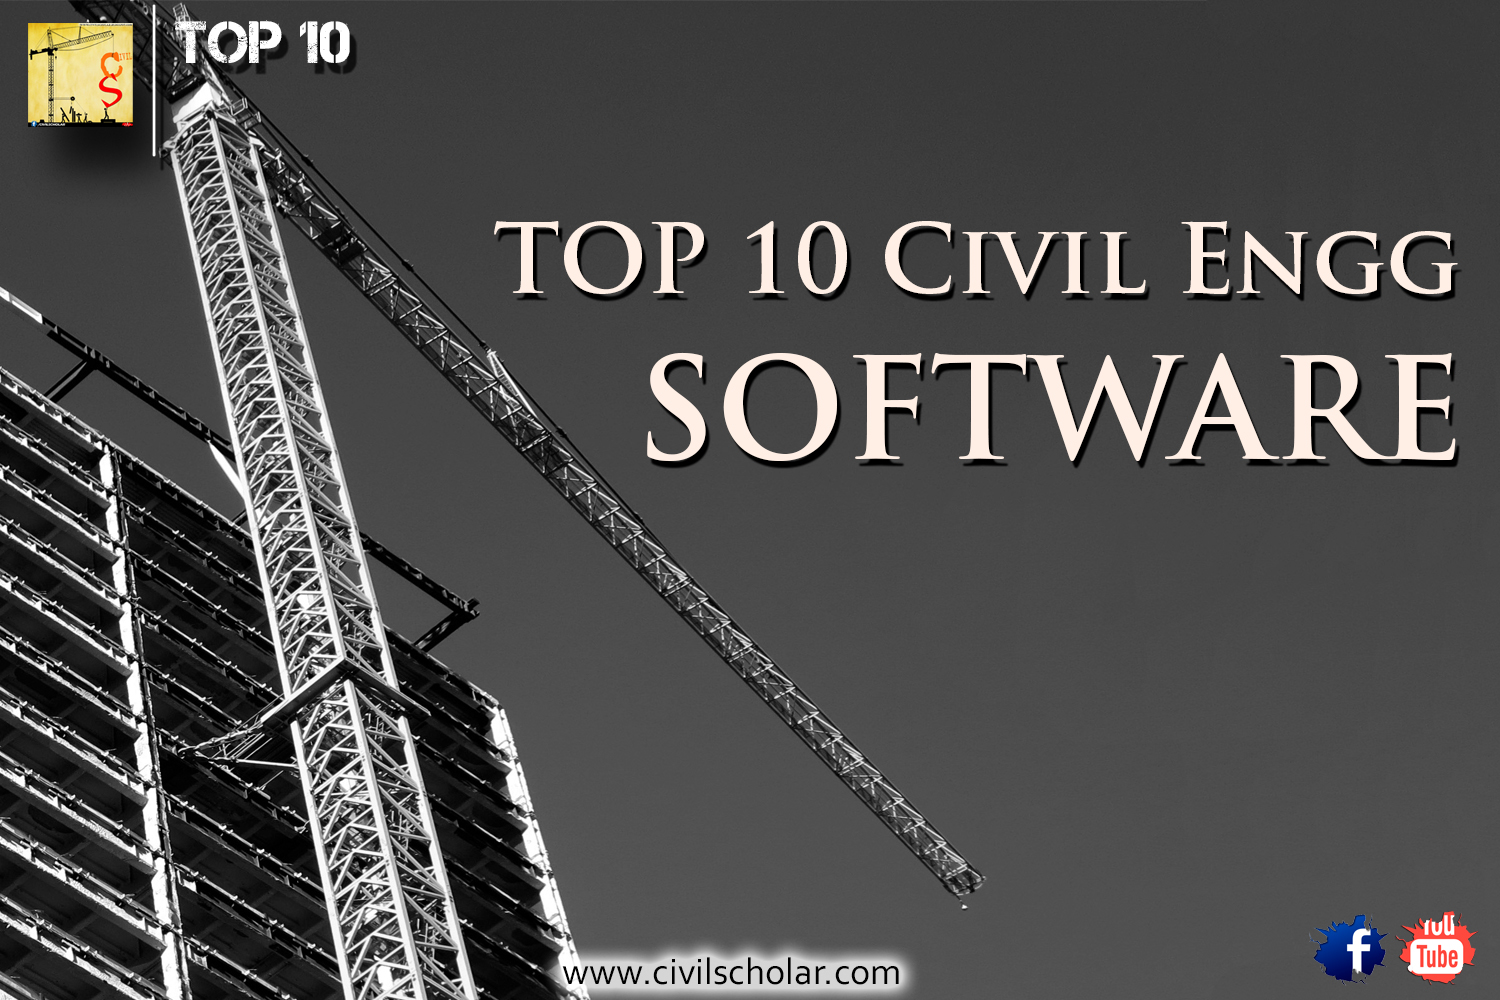 Best structural engineering software analysis and design